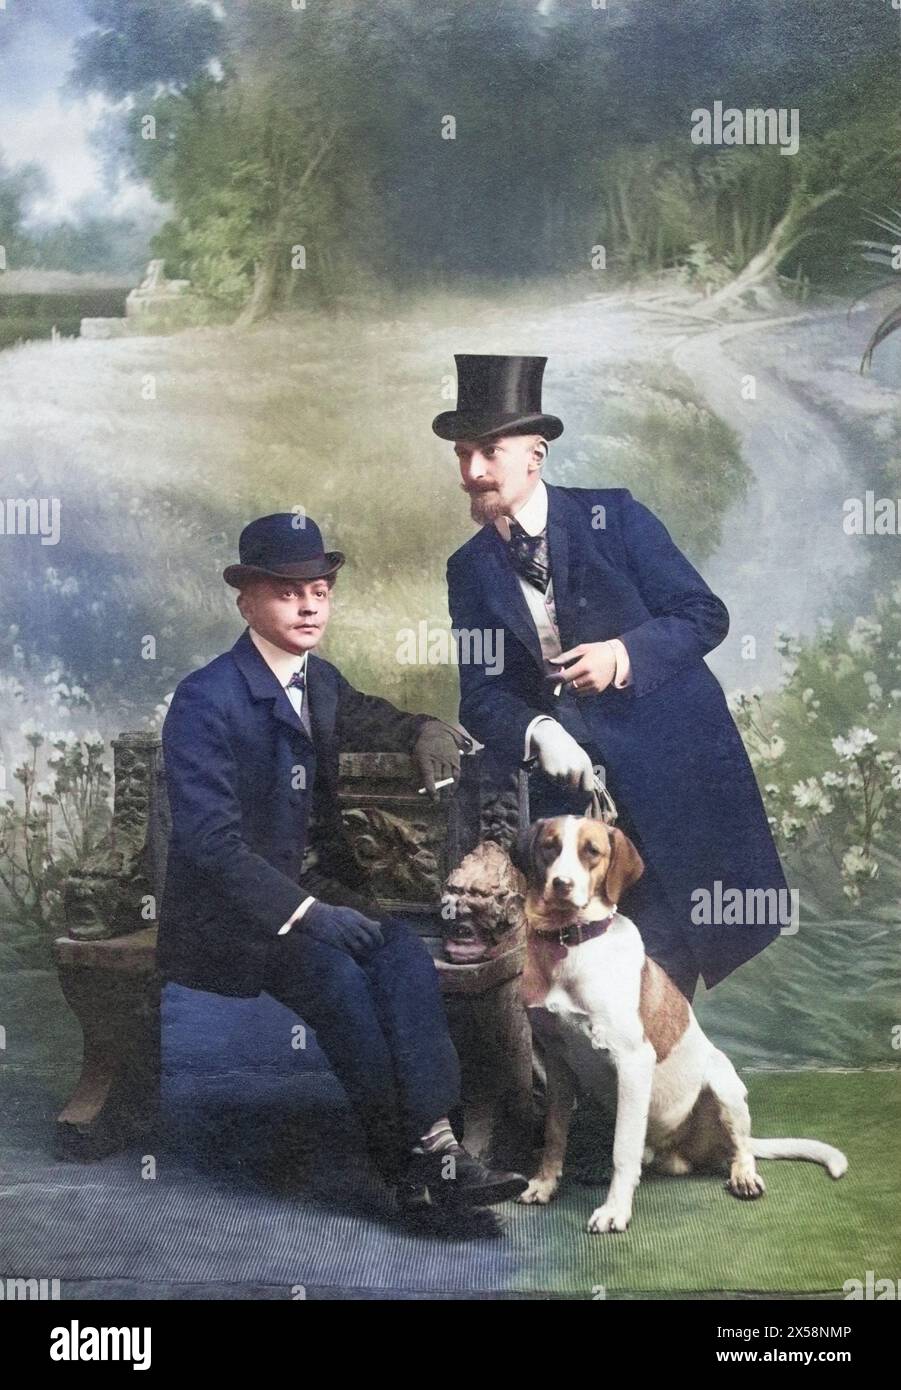 people, men, portrait / half length 1900s, two men with dog, Villach, 1905, ADDITIONAL-RIGHTS-CLEARANCE-INFO-NOT-AVAILABLE Stock Photo